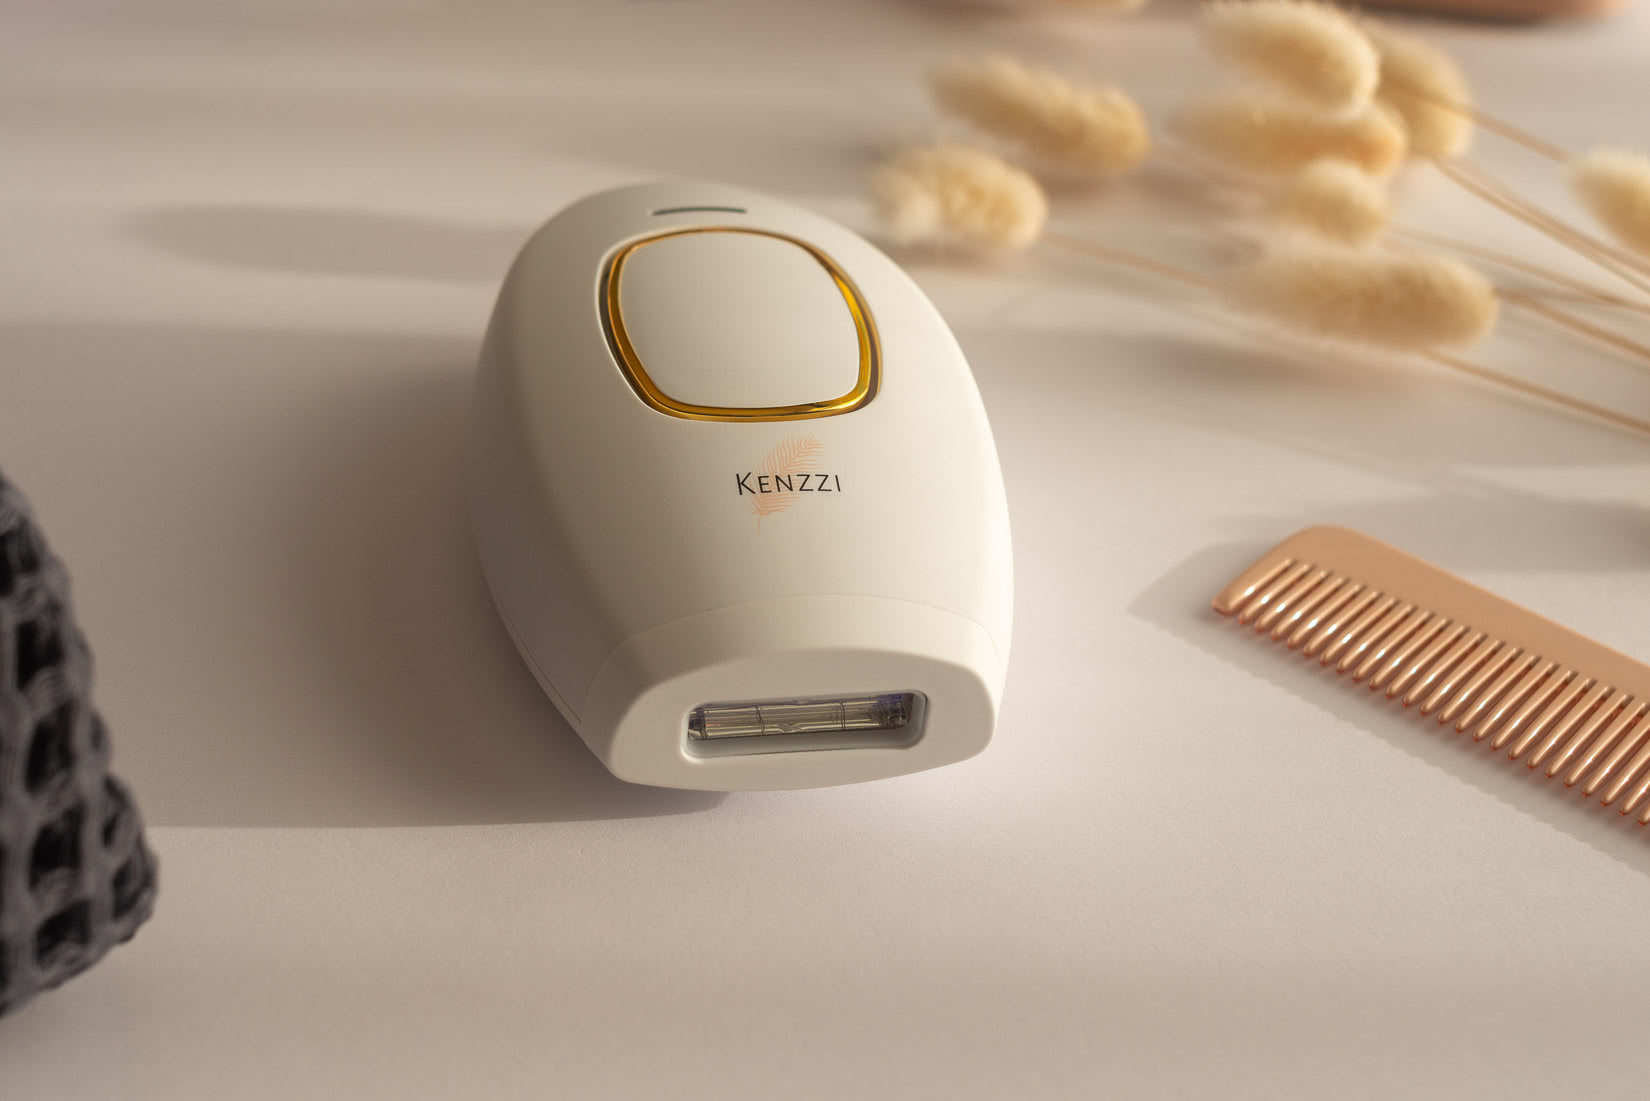 kenzzi ipl hair removal review - Luxe Digital